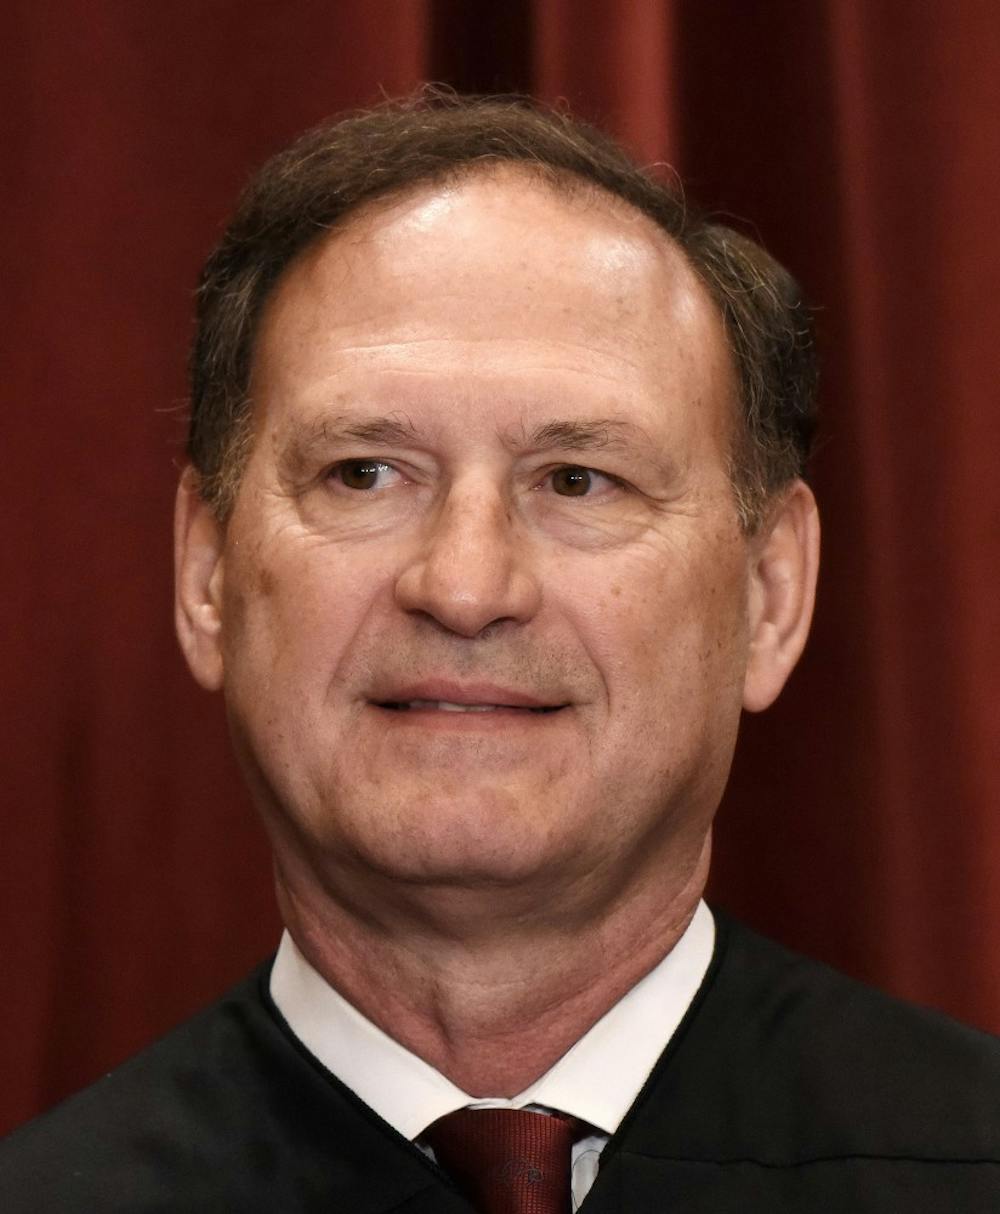 Associate Justice Samuel Alito Jr. poses during a group photograph at the Supreme Court building on June 1 2017 in Washington, D.C.  (Olivier Douliery/Abaca Press/TNS) 